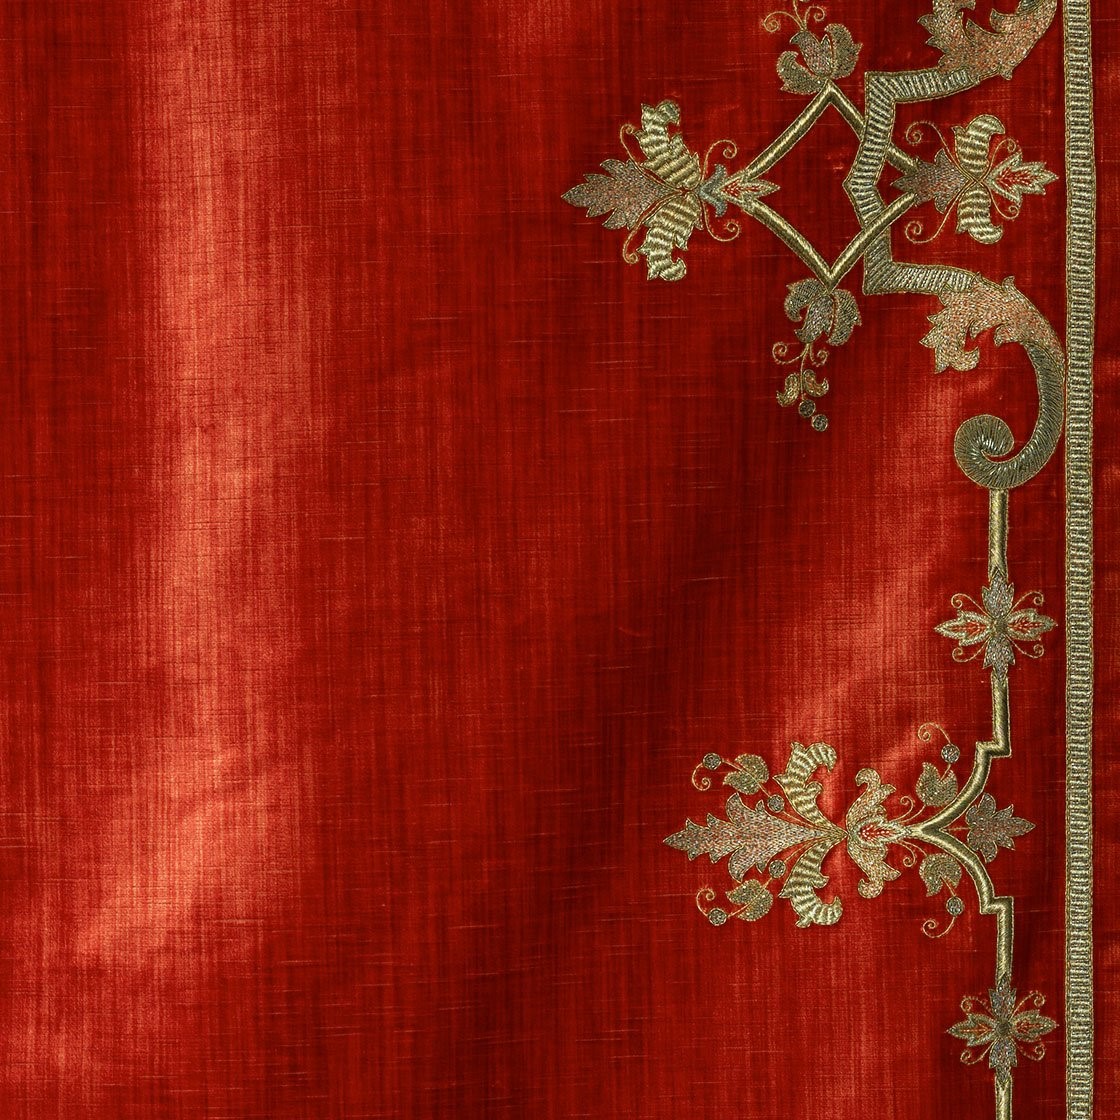 Cellini Pattern on Fabric by Beaumont & Fletcher